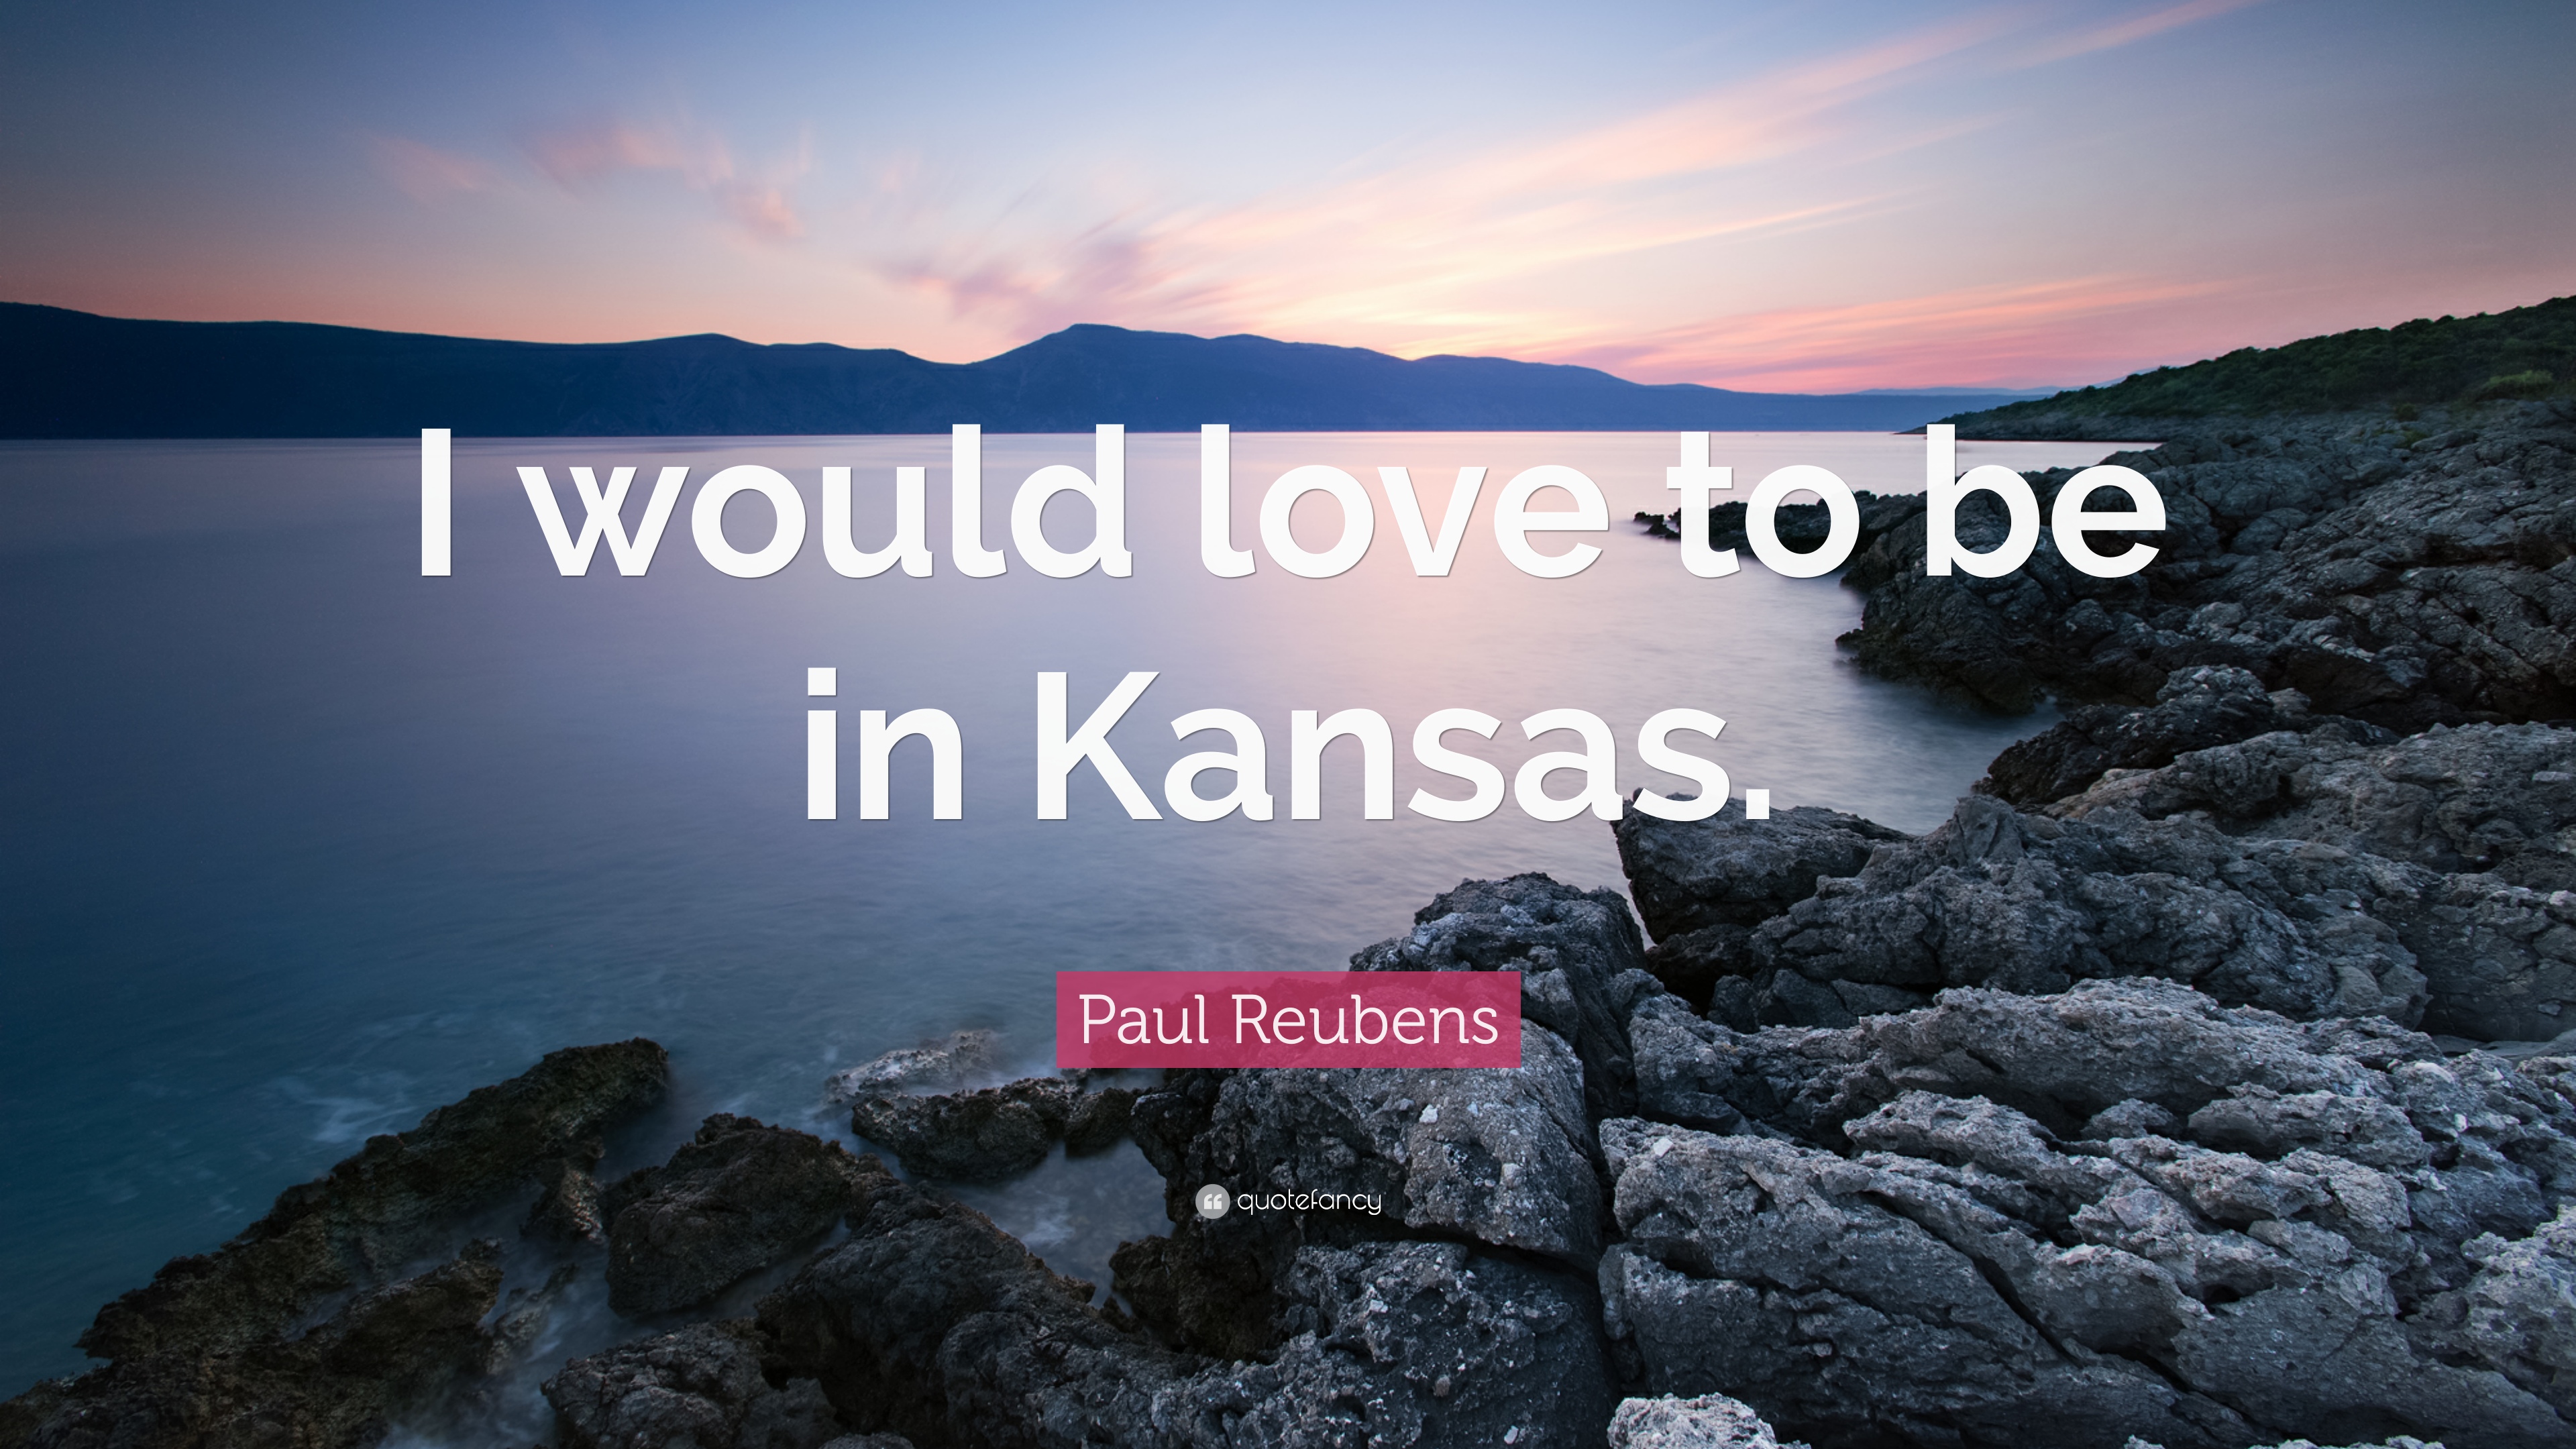 Paul Reubens Quote: “I would love to be in Kansas.” 7 wallpaper